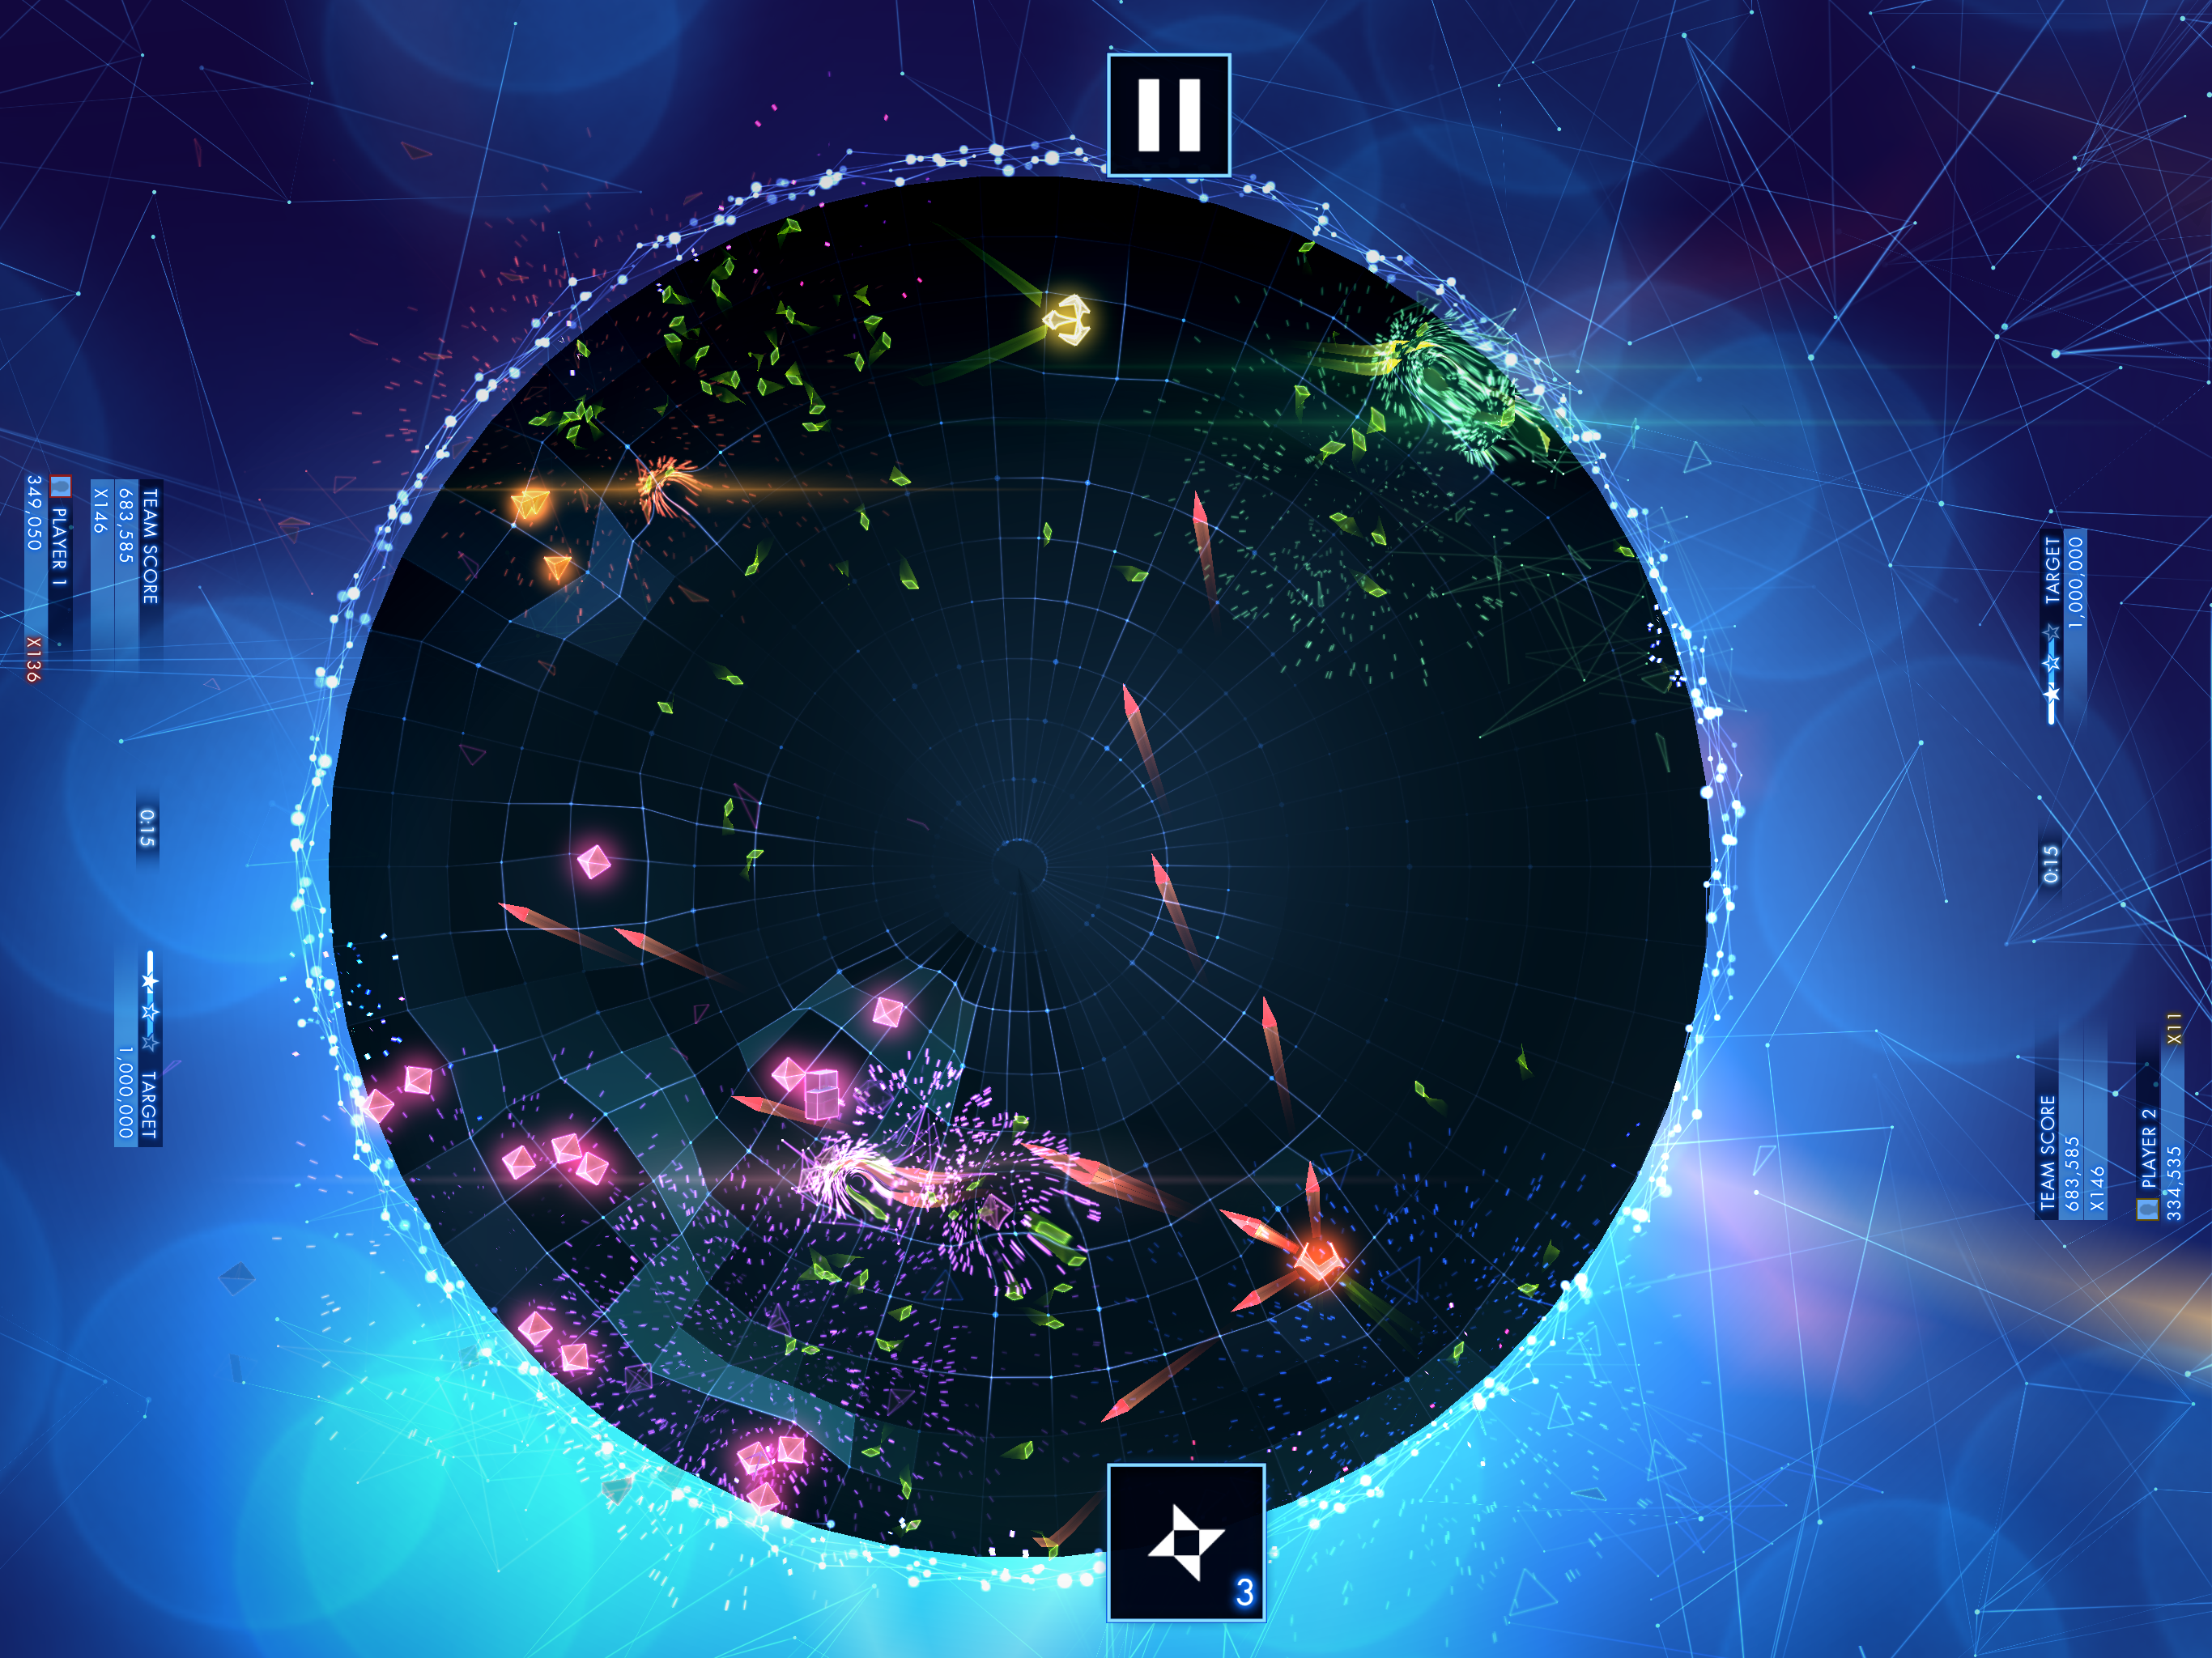 Geometry Wars 3: Dimensions Evolved (£7.99)